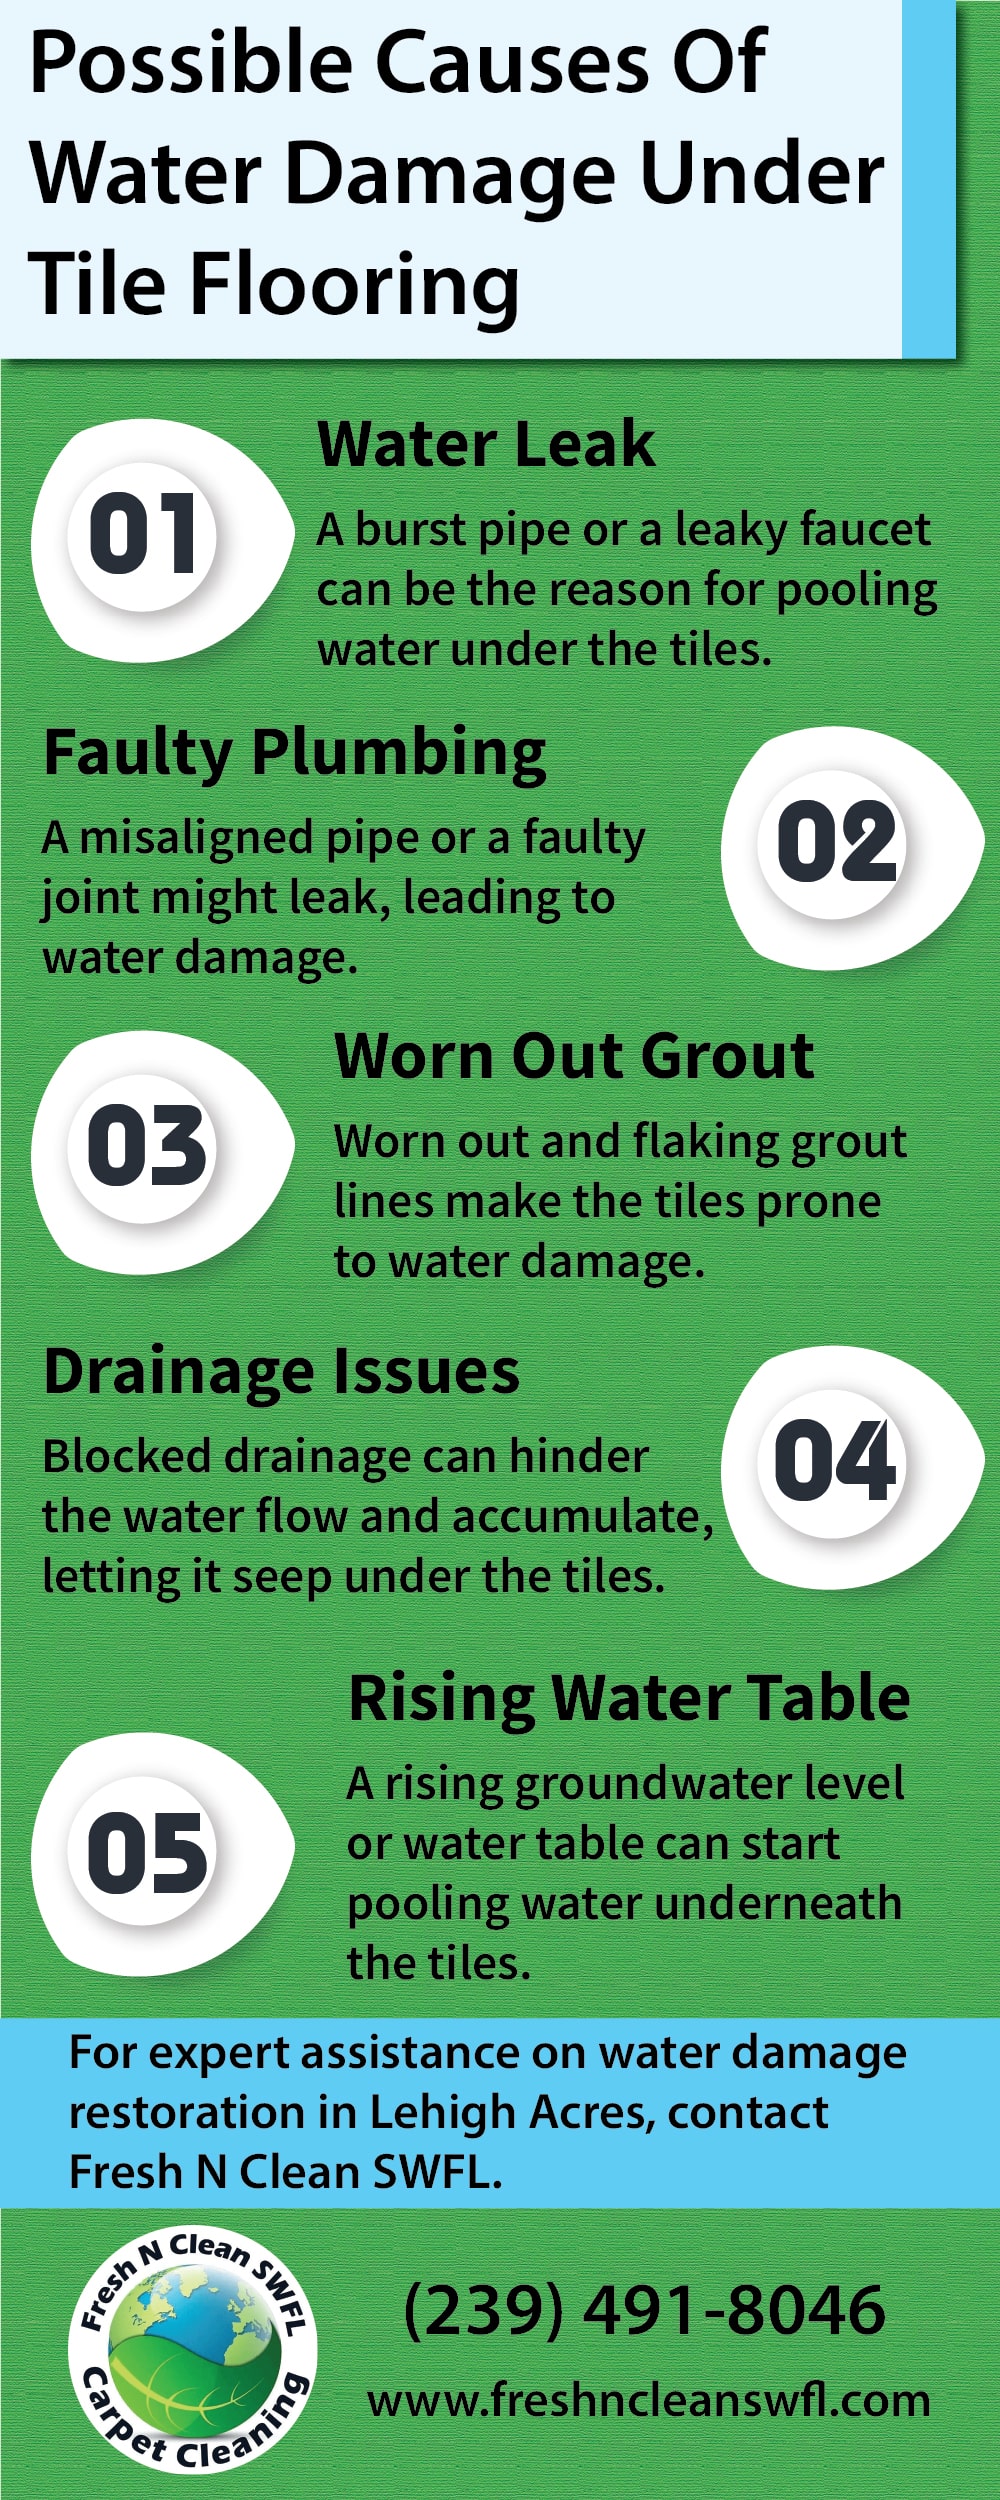 Possible Causes Of Water Damage Under Tile Flooring